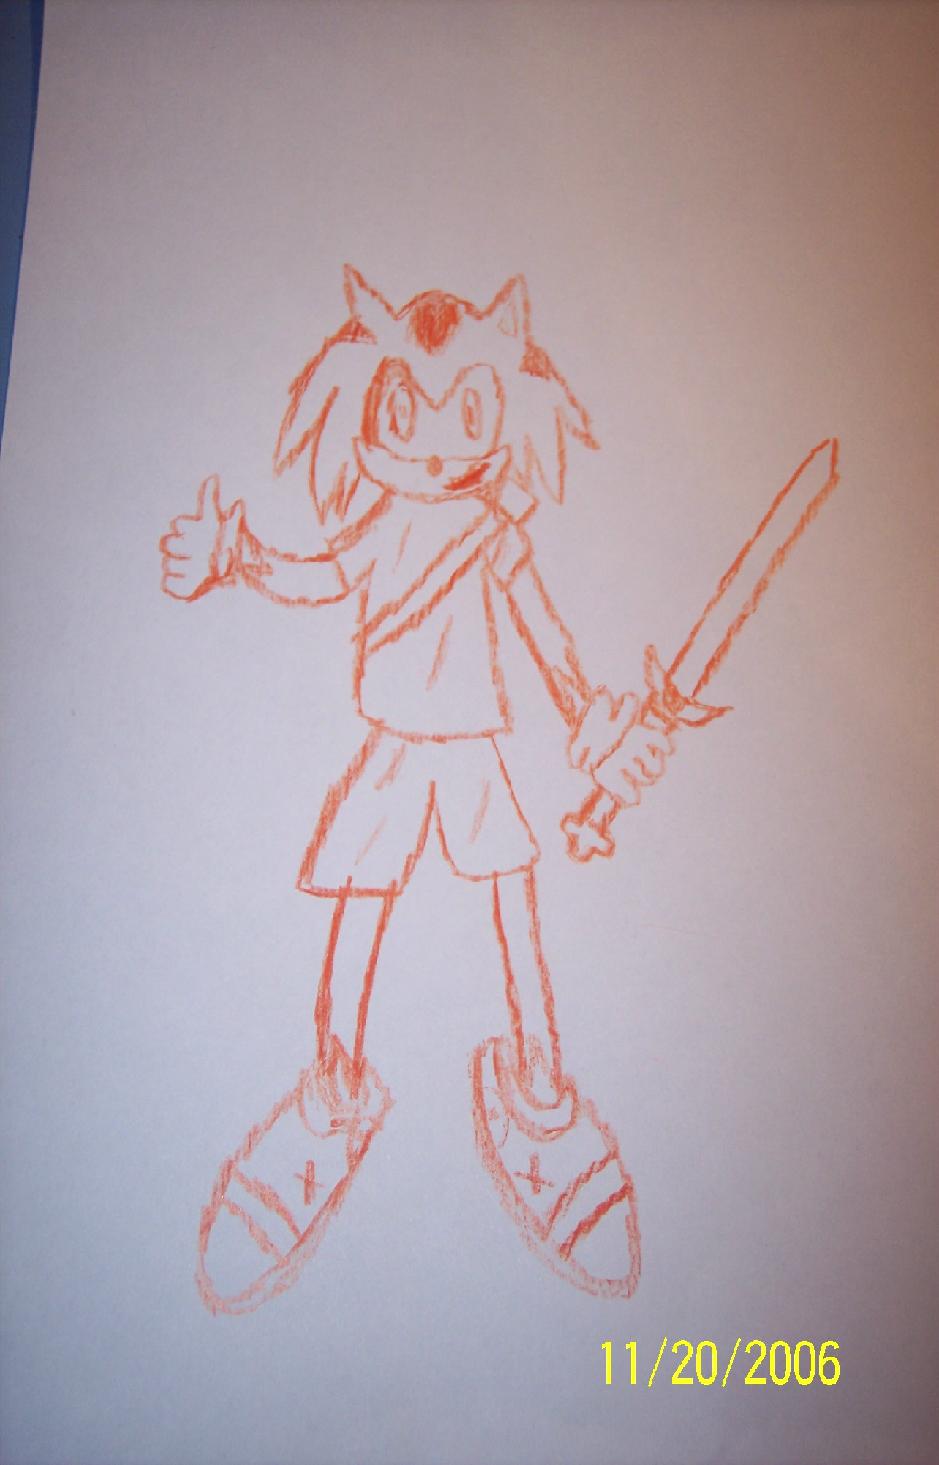 Speedy the hedgehog (uncolored) by Speedy_the_Hedgehog